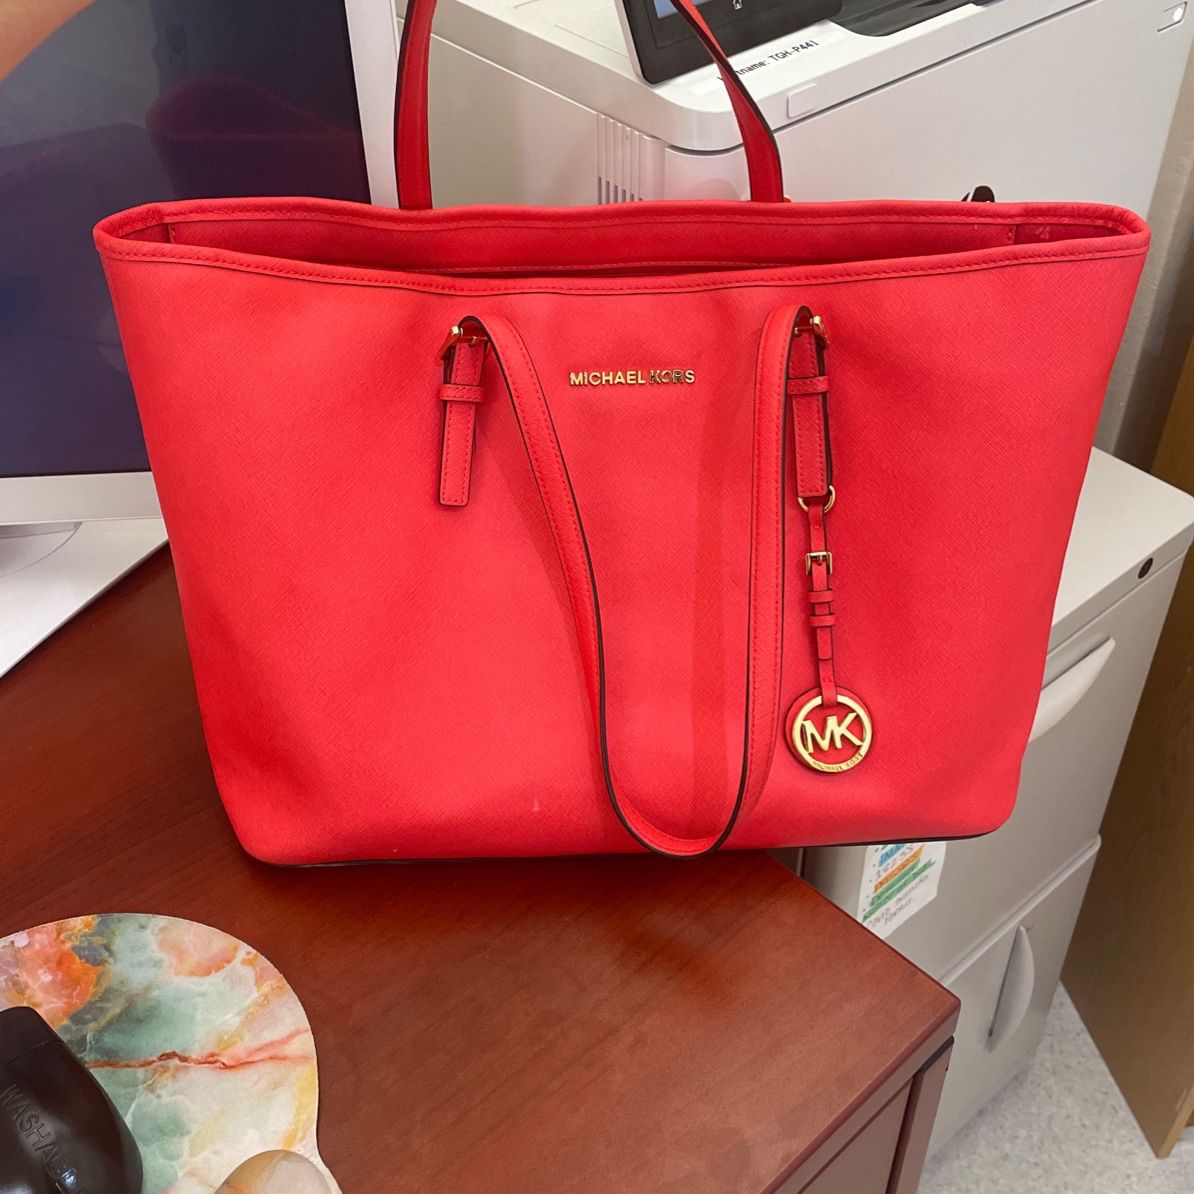 Franklin Covey Business Laptop leather bag for Sale in Miami, FL - OfferUp